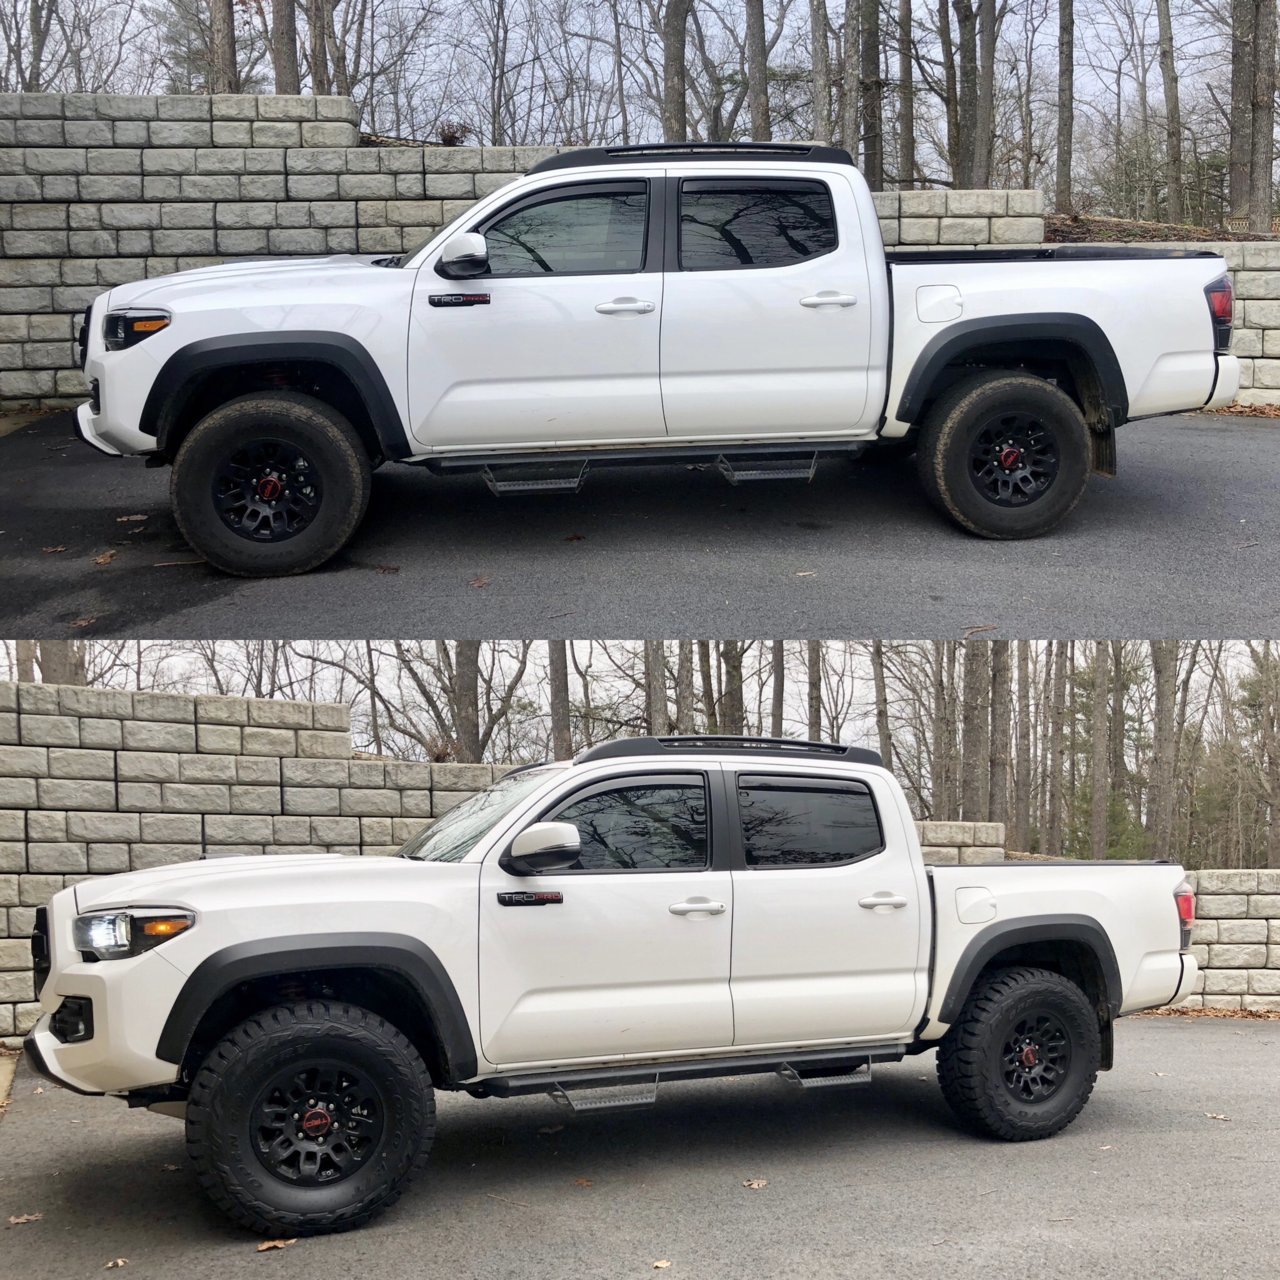 tires_before_after.jpg